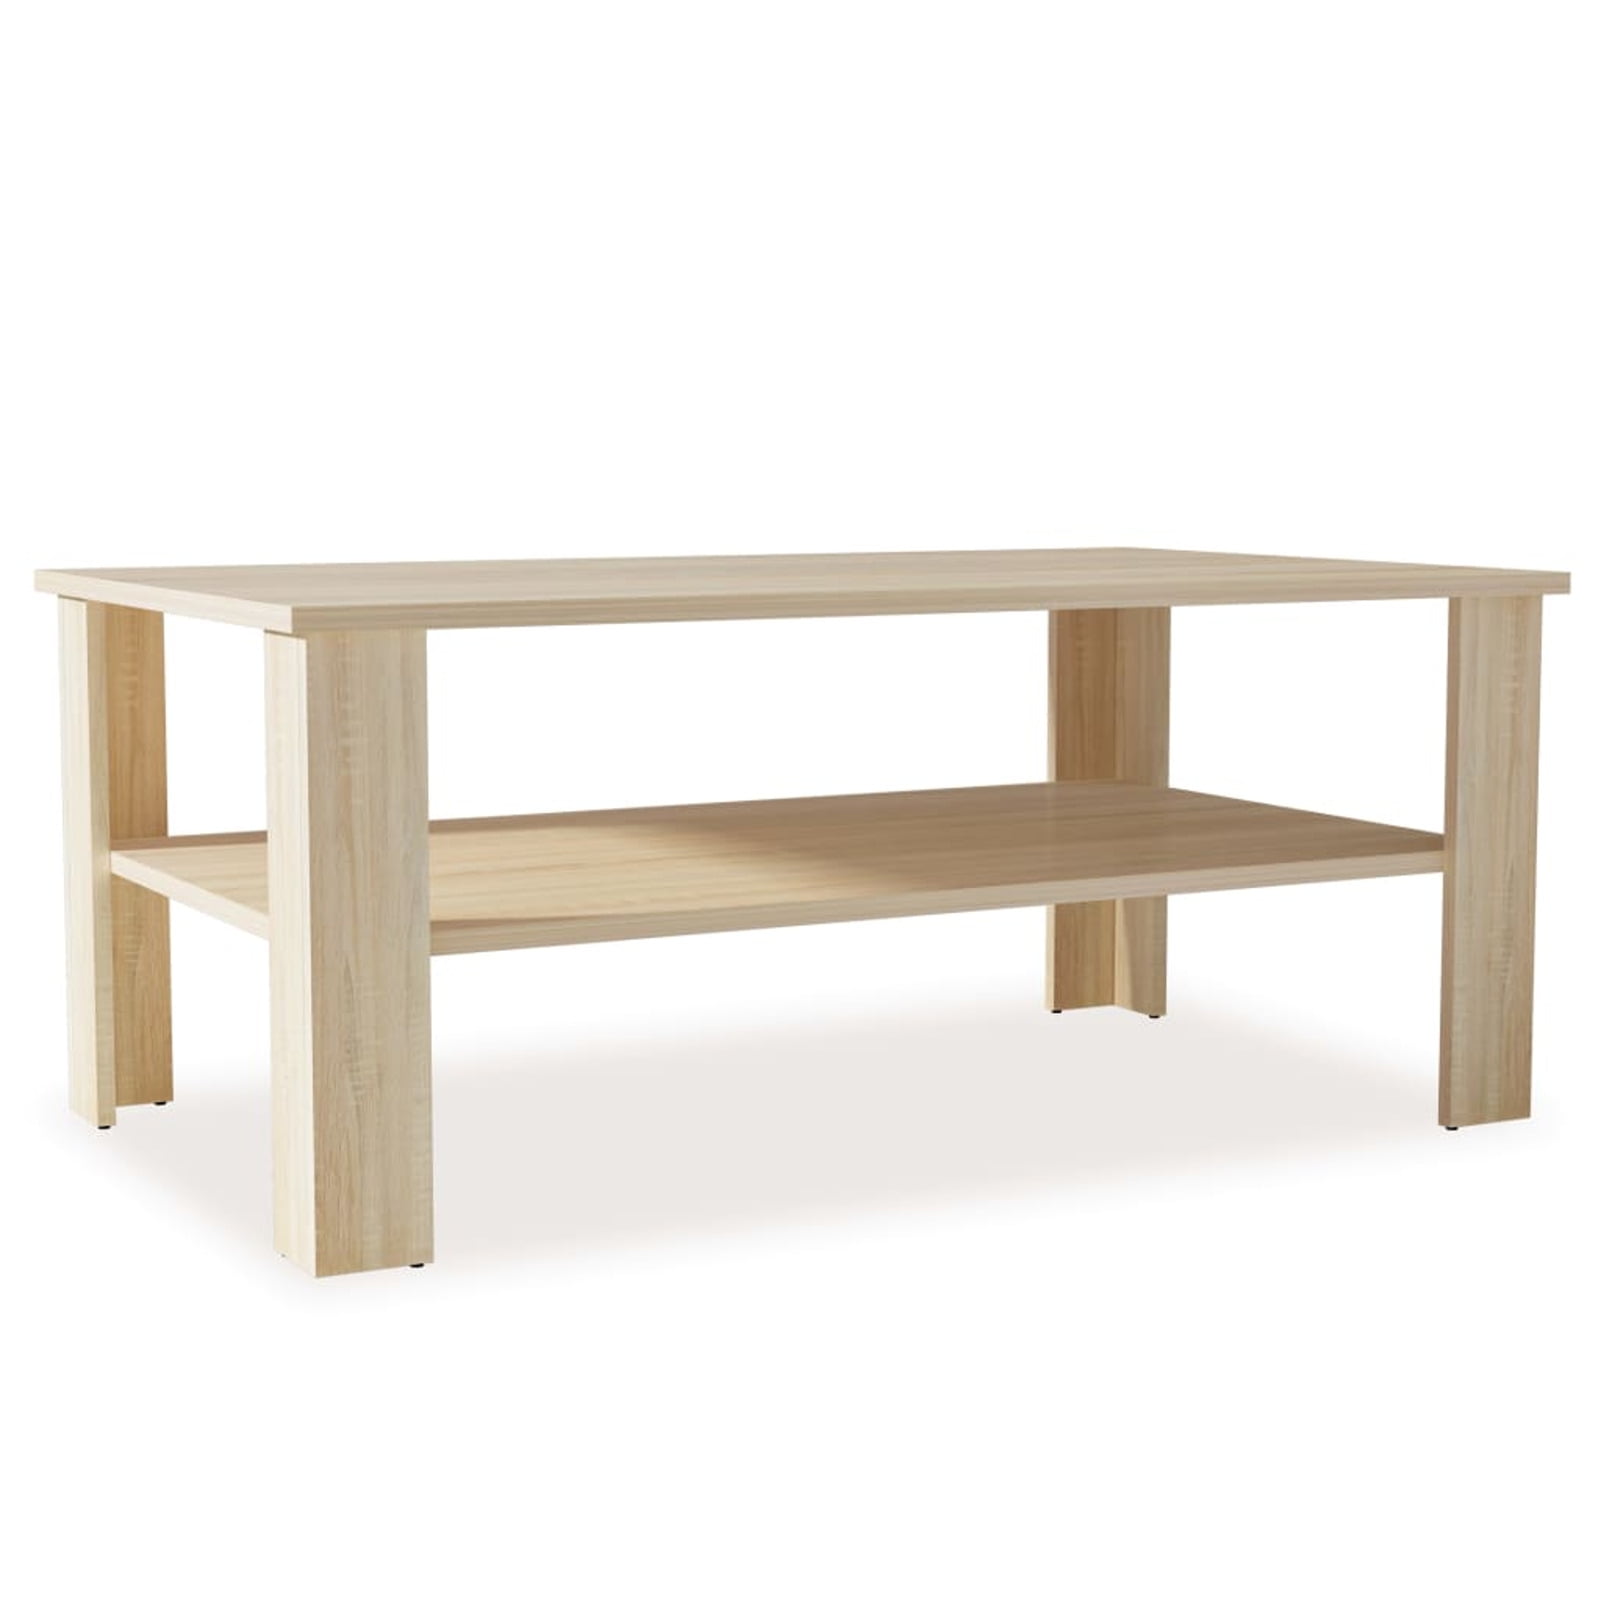 Details about   Coffee Table Chipboard 35.4"x23.2"x16.5" Oak and White PVC edges stable durable 